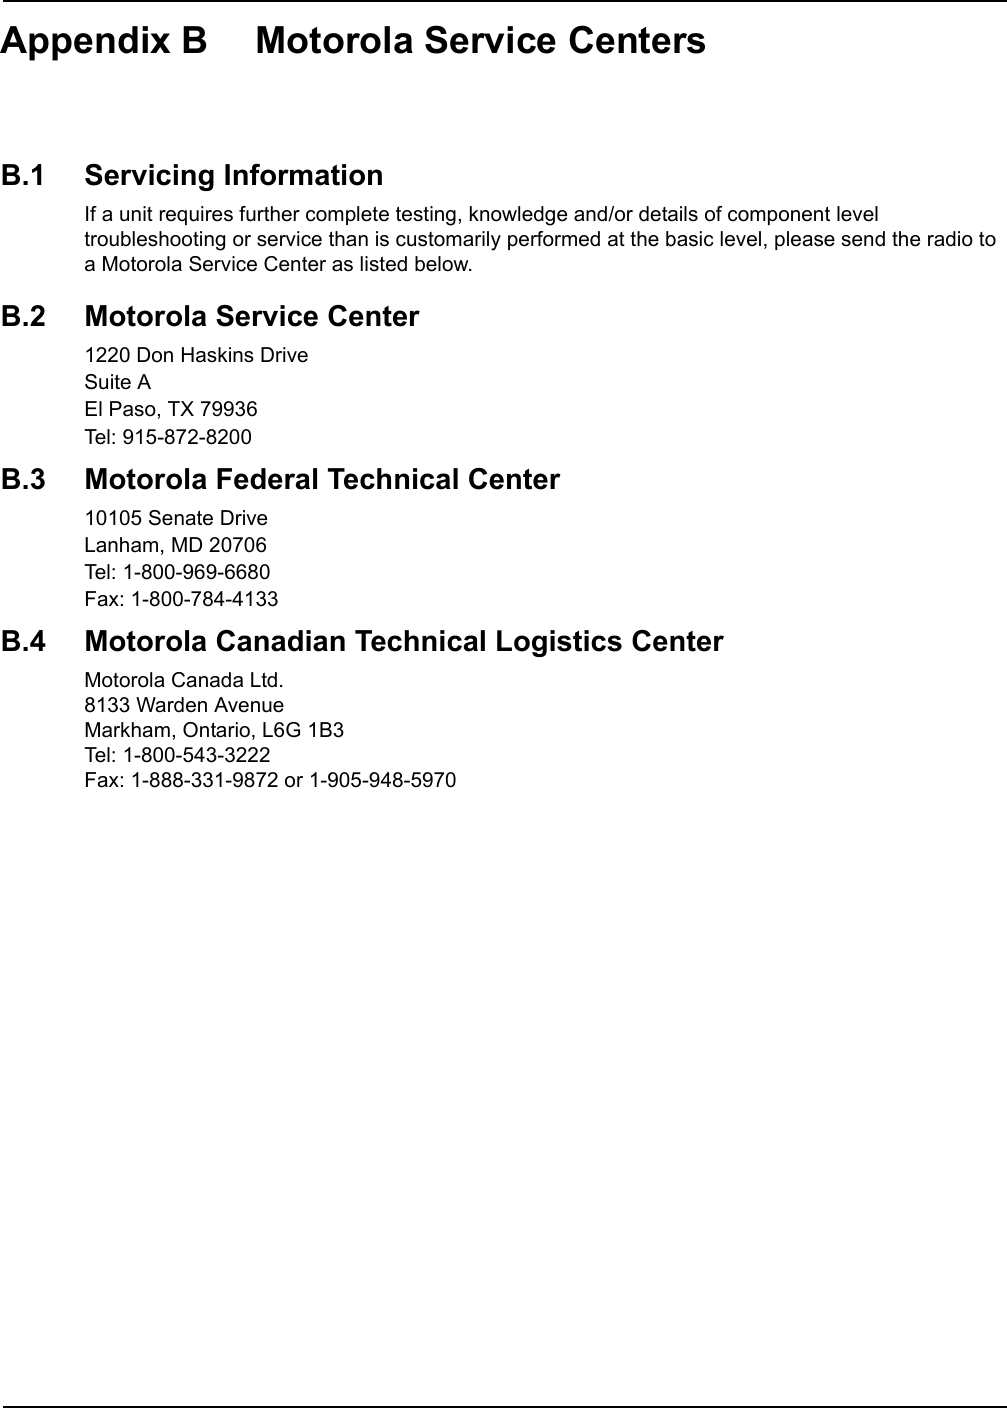 Appendix B Motorola Service CentersB.1 Servicing InformationIf a unit requires further complete testing, knowledge and/or details of component level troubleshooting or service than is customarily performed at the basic level, please send the radio to a Motorola Service Center as listed below.B.2 Motorola Service Center1220 Don Haskins DriveSuite AEl Paso, TX 79936Tel: 915-872-8200B.3 Motorola Federal Technical Center10105 Senate DriveLanham, MD 20706Tel: 1-800-969-6680Fax: 1-800-784-4133B.4 Motorola Canadian Technical Logistics CenterMotorola Canada Ltd.8133 Warden AvenueMarkham, Ontario, L6G 1B3Tel: 1-800-543-3222Fax: 1-888-331-9872 or 1-905-948-5970